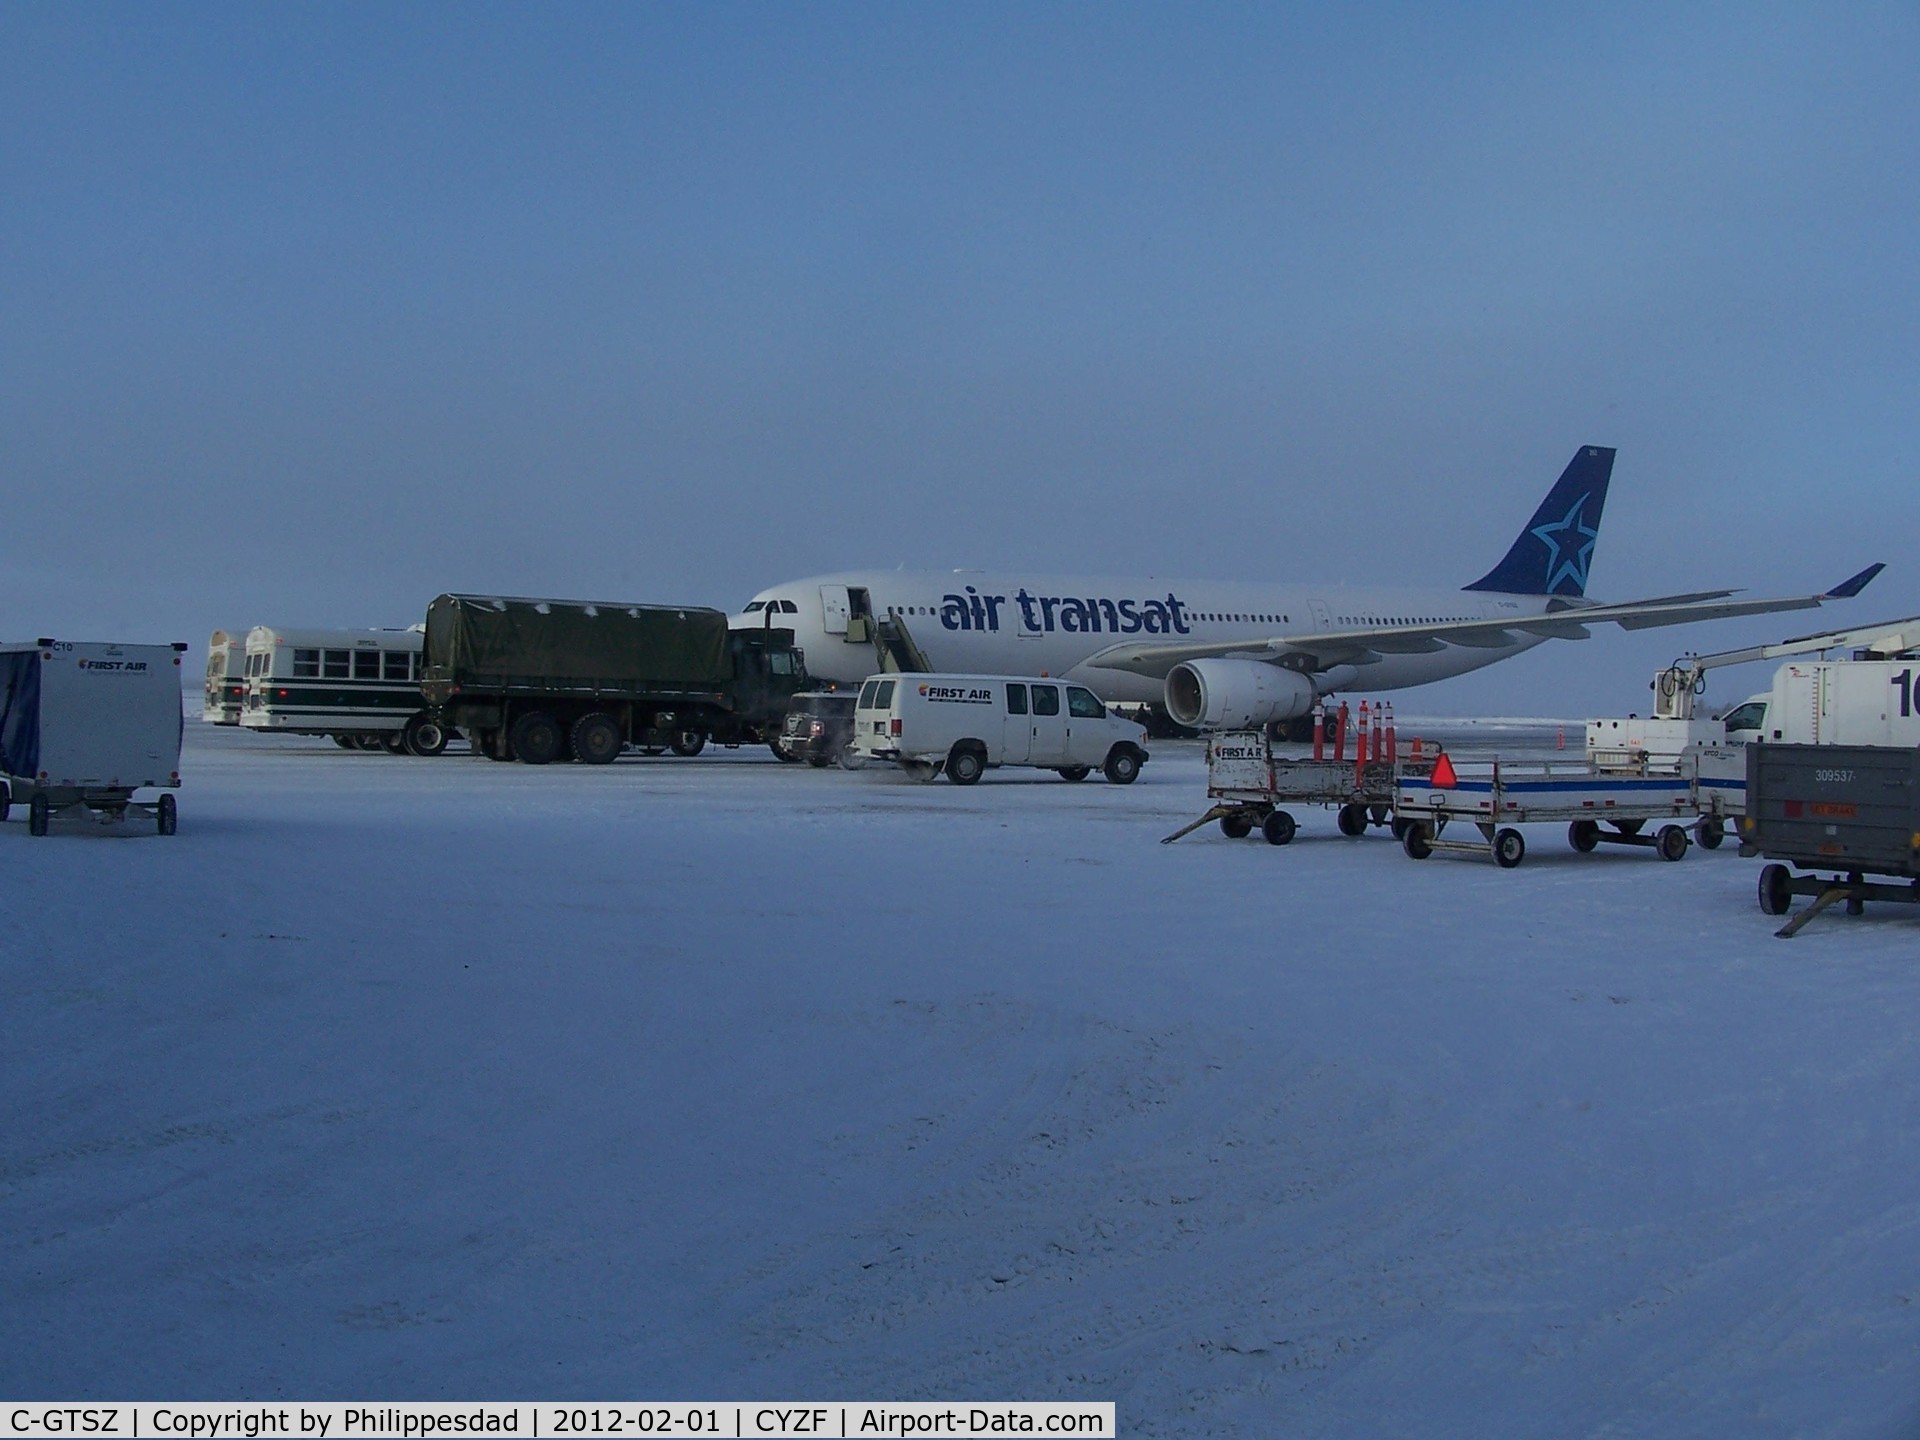 C-GTSZ, 2008 Airbus A330-243 C/N 971, Air Transat A330 at Yellowknife 2012 Feb 01 appears to be deployed by Canadian Armed Forces to deliver personnel for winter exercises.